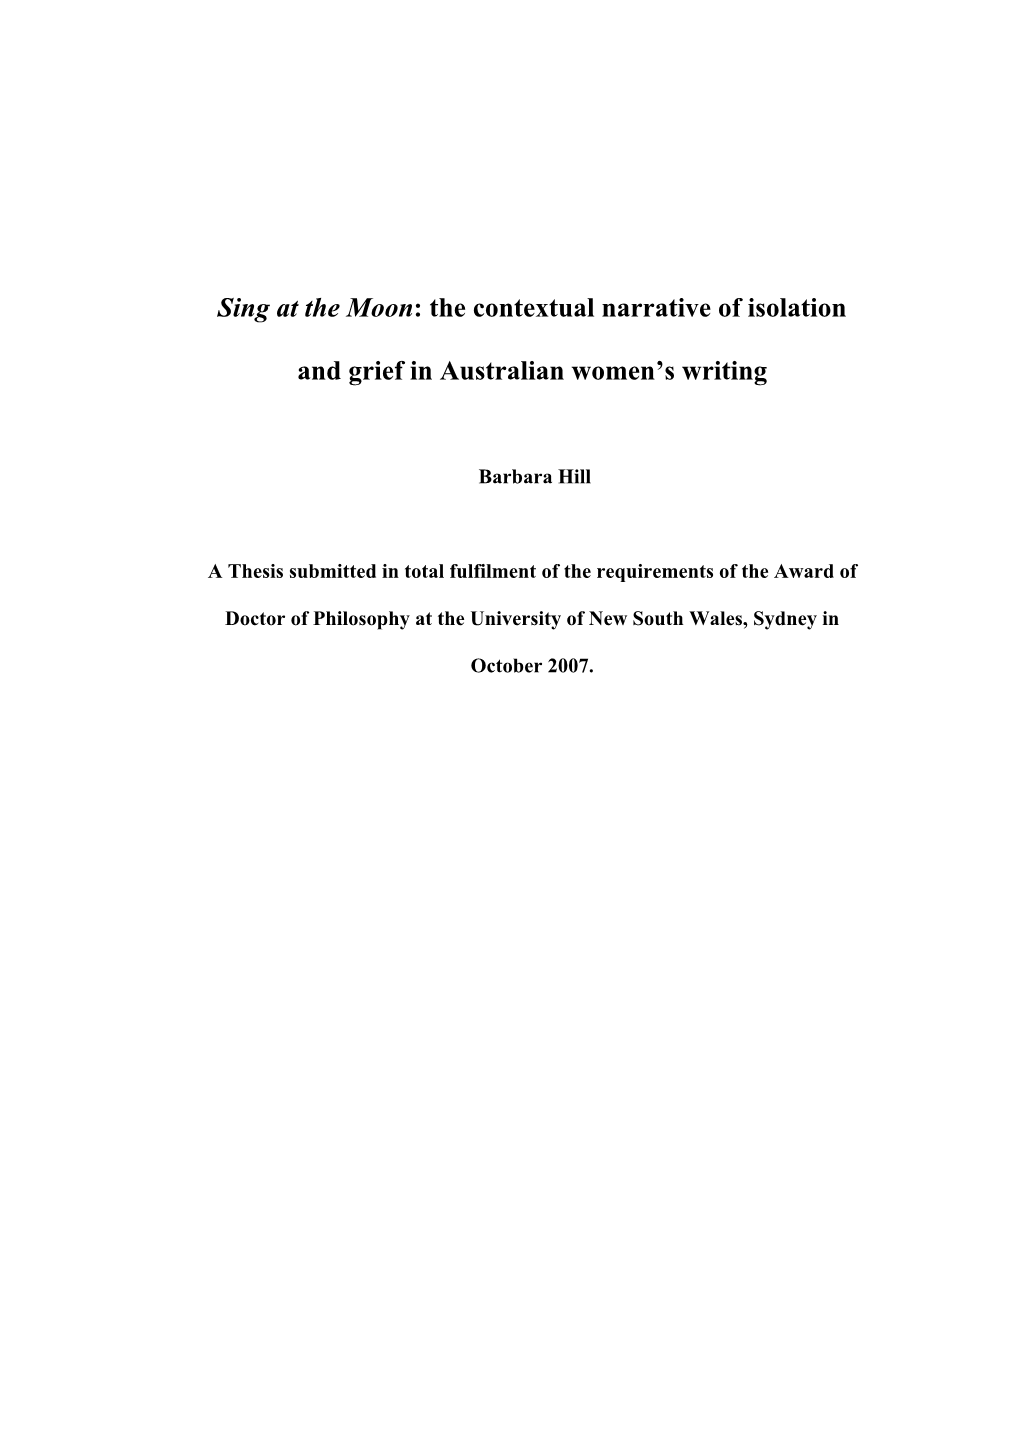 The Contextual Narrative of Isolation and Grief in Australia Womenâ€™S Writing